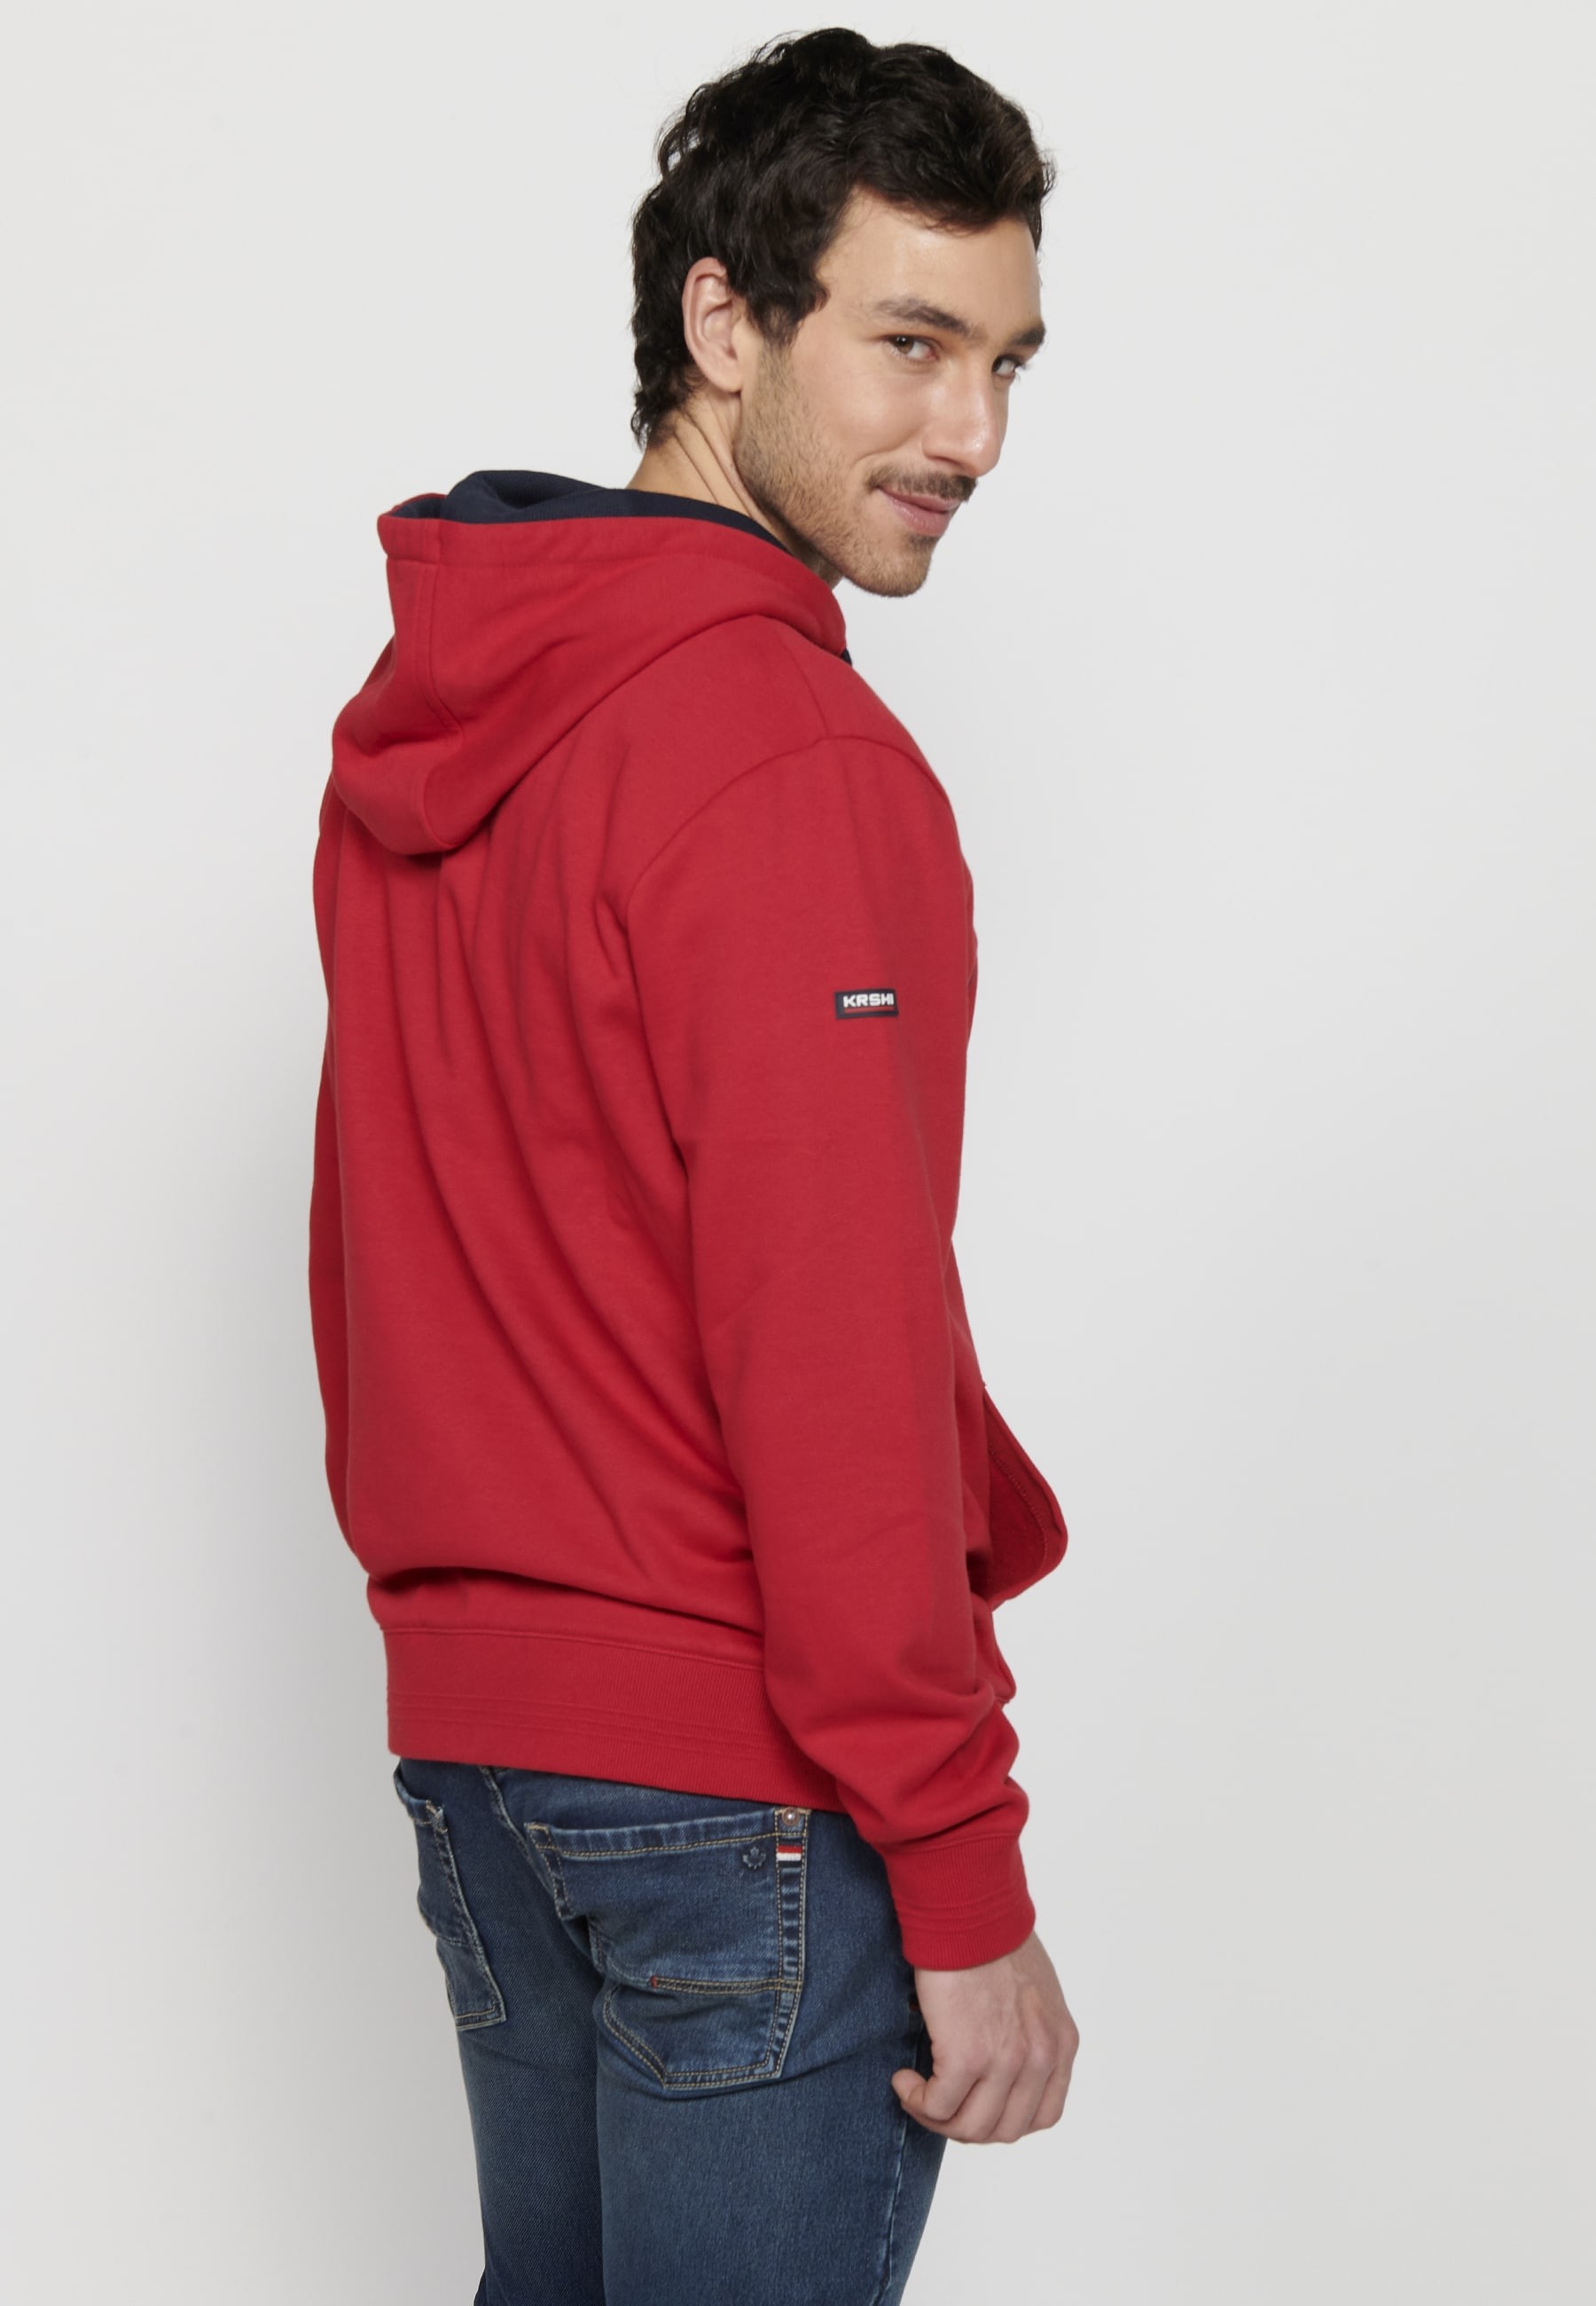 Men's Red Color Long Sleeve Hooded Sweatshirt with Front Embossed Detail 7